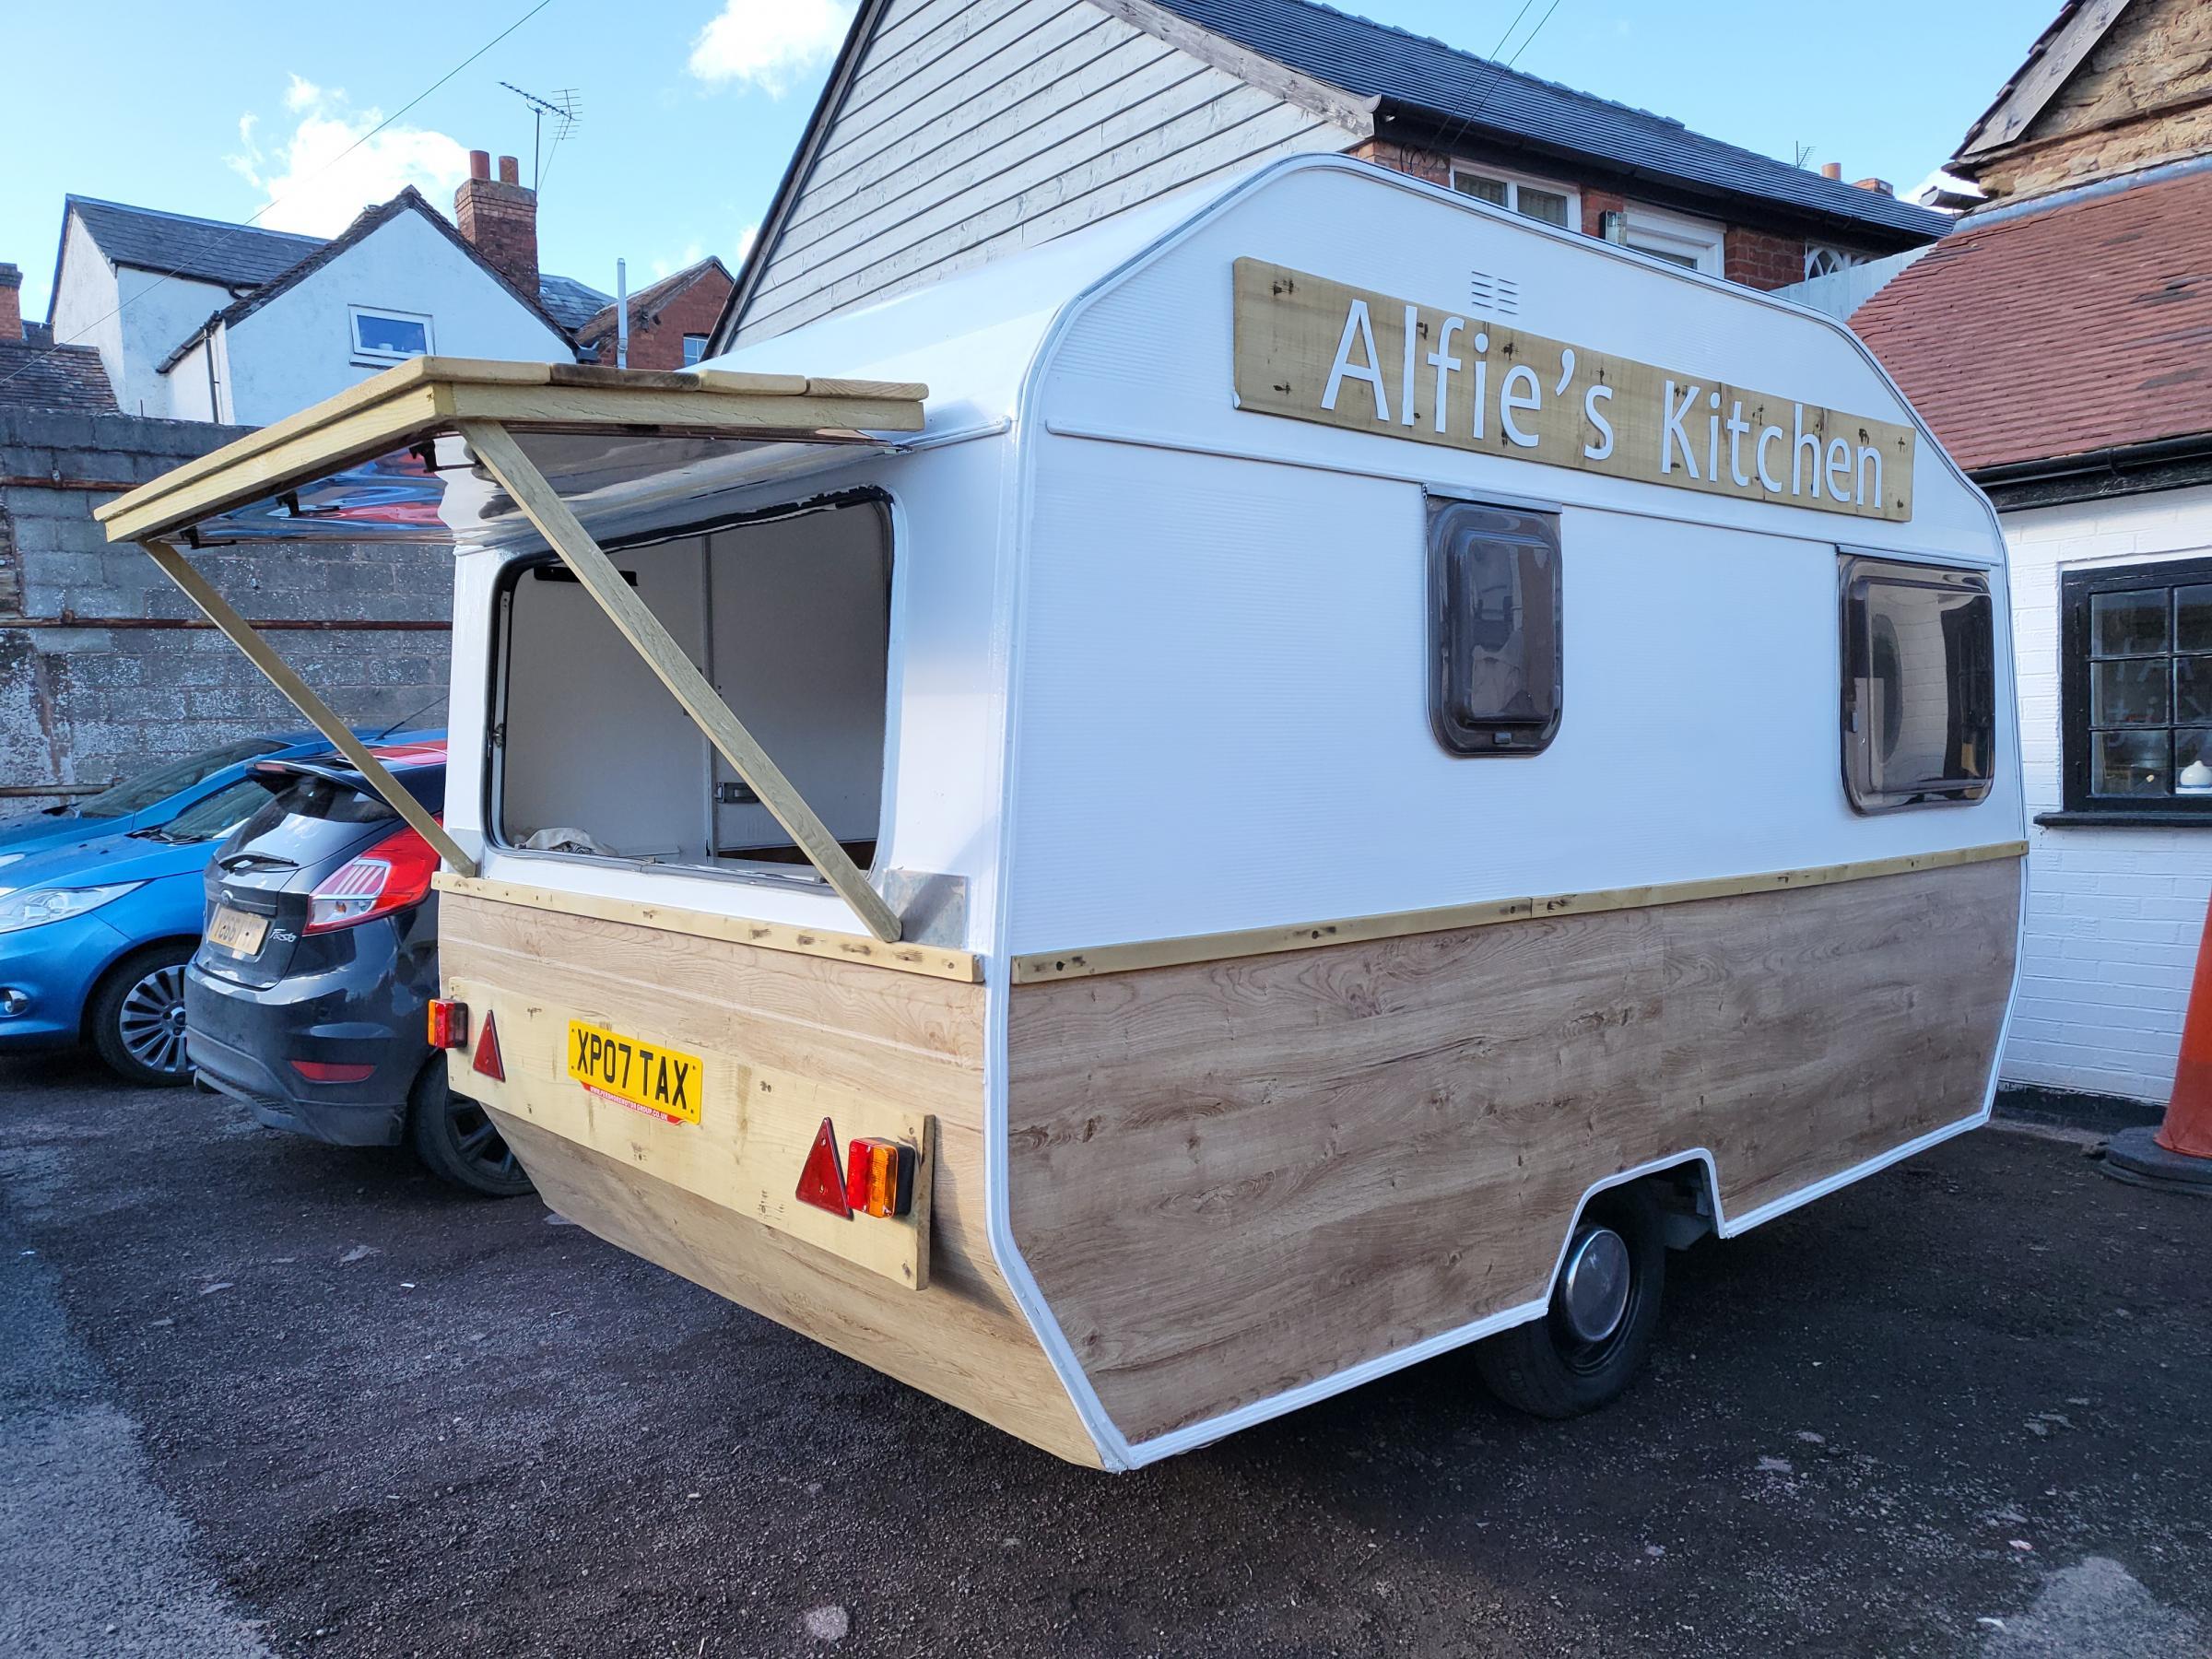 The converted caravan will be serving an array of homemade food